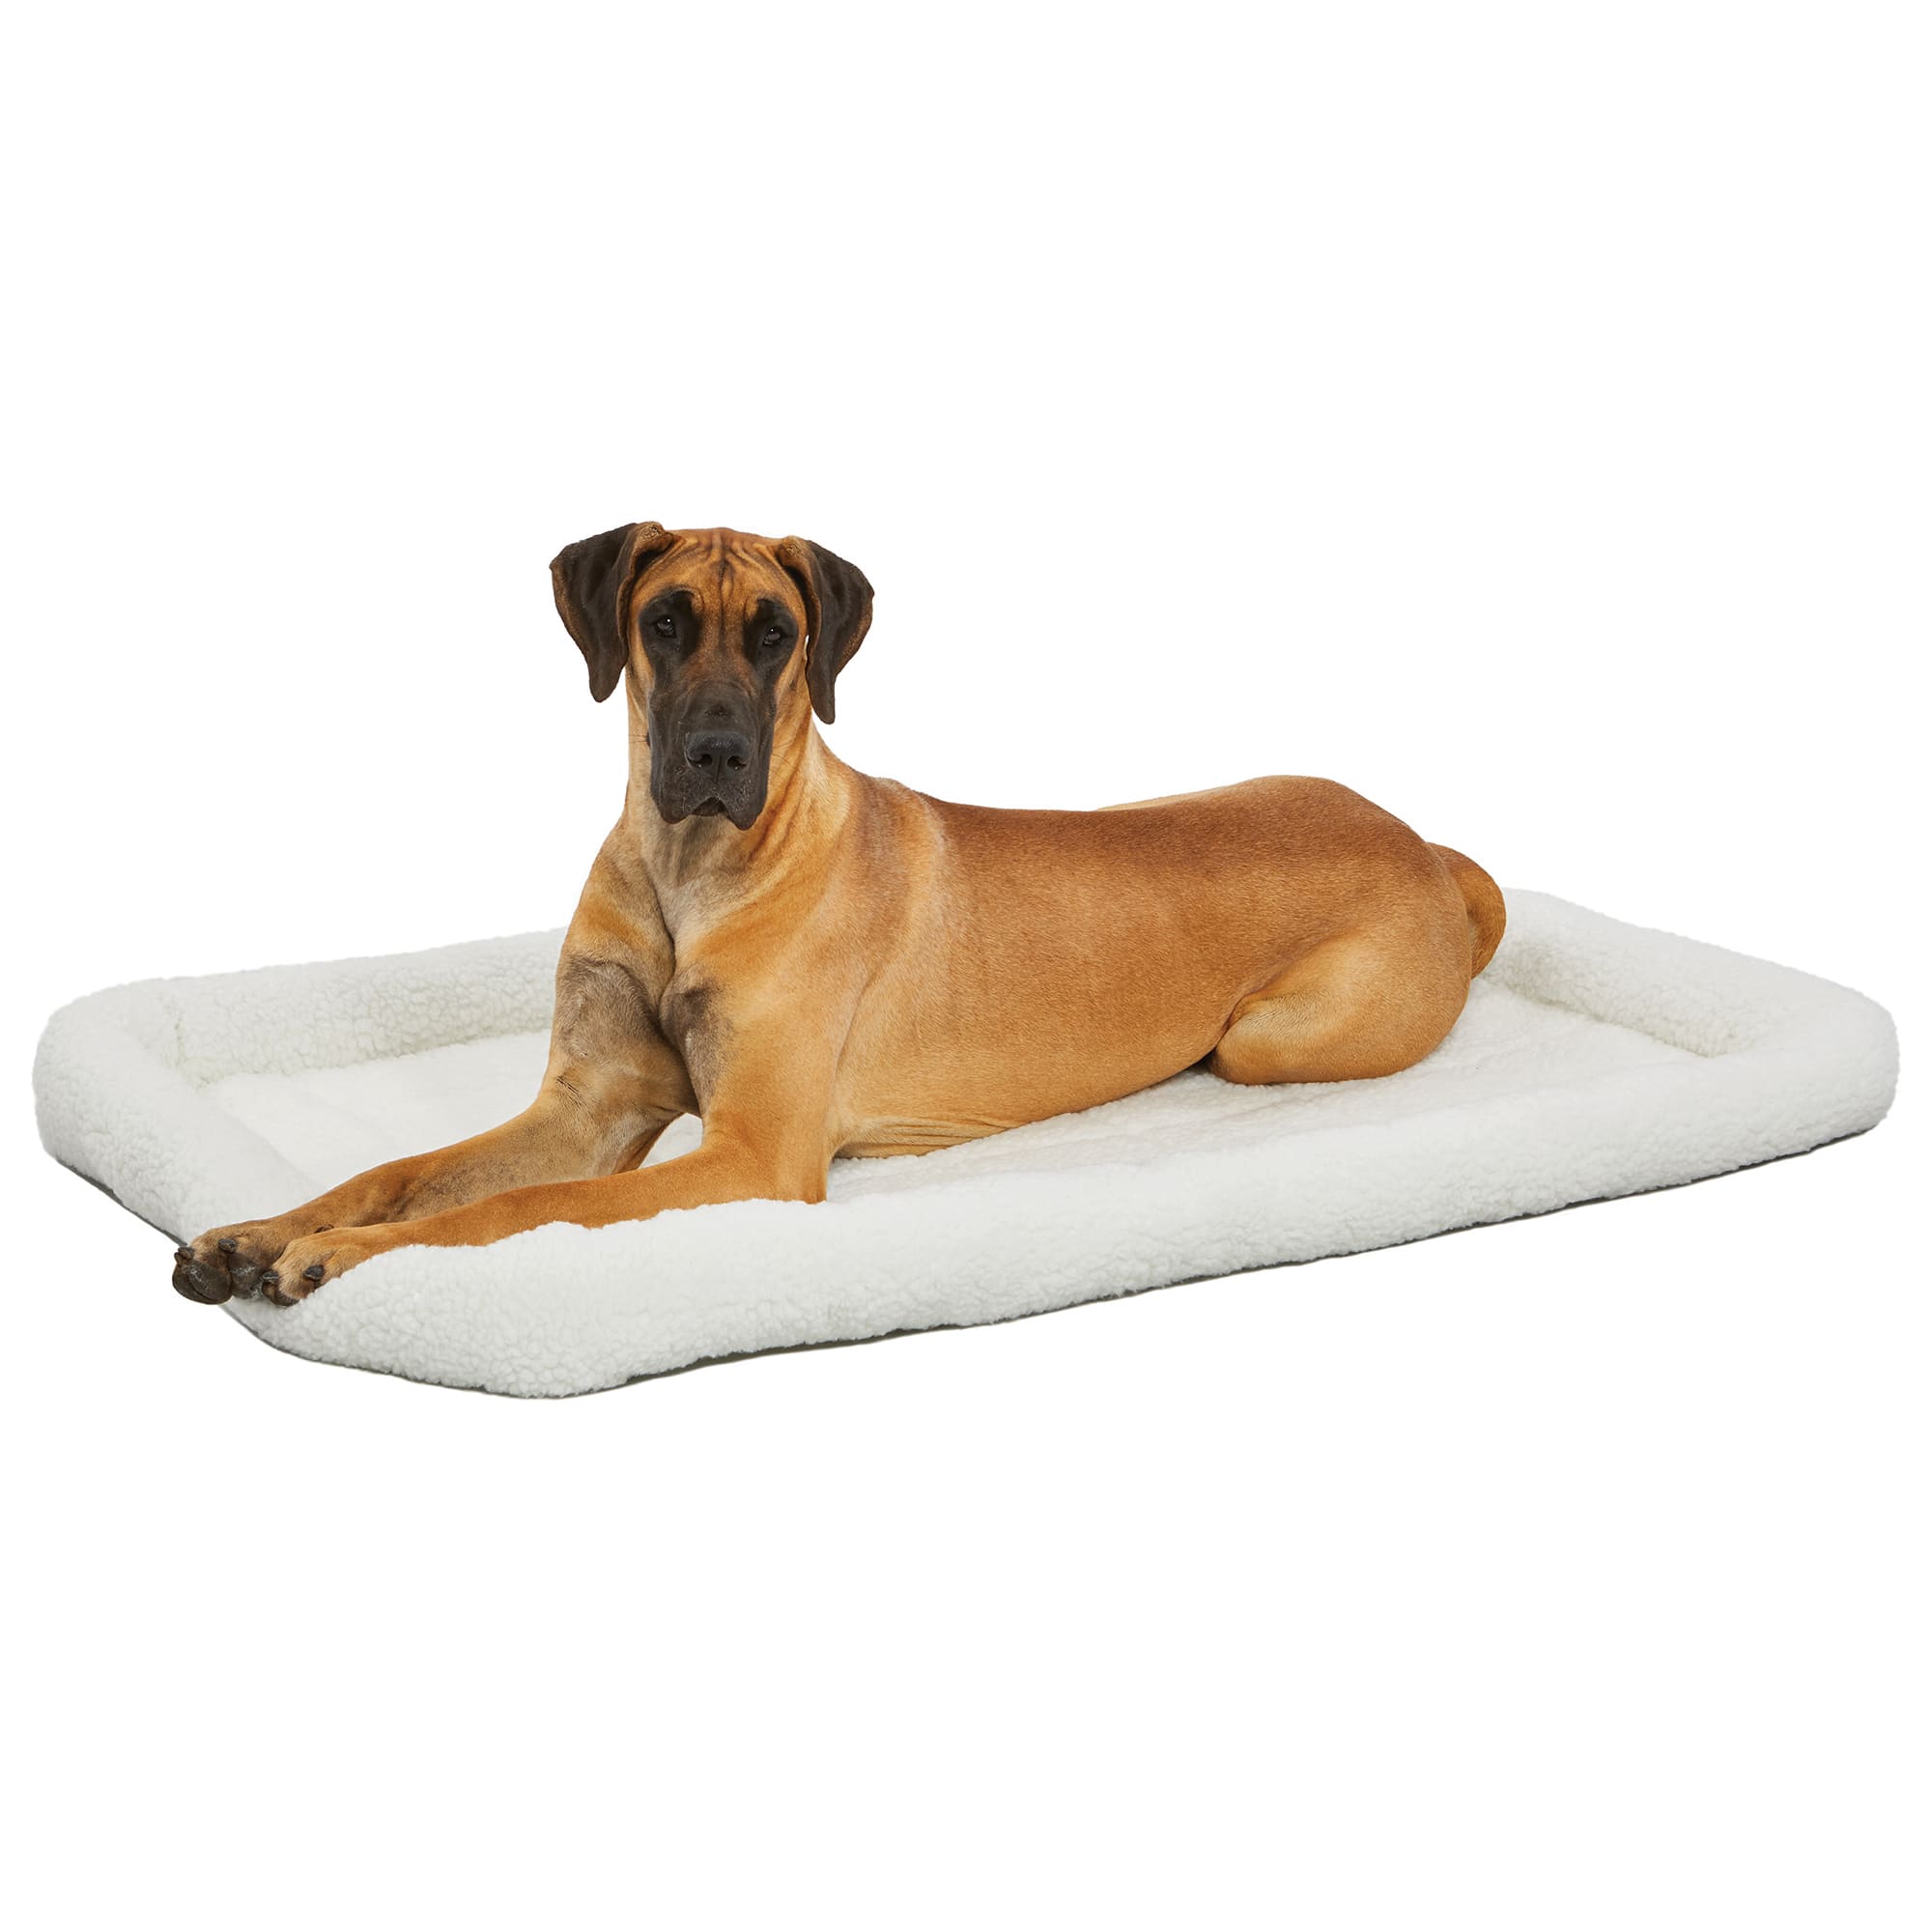 Photos - Dog Bed / Basket Midwest Quiet Time Bolster White Dog Bed, 54" L X 37" W, 3X-Large, 